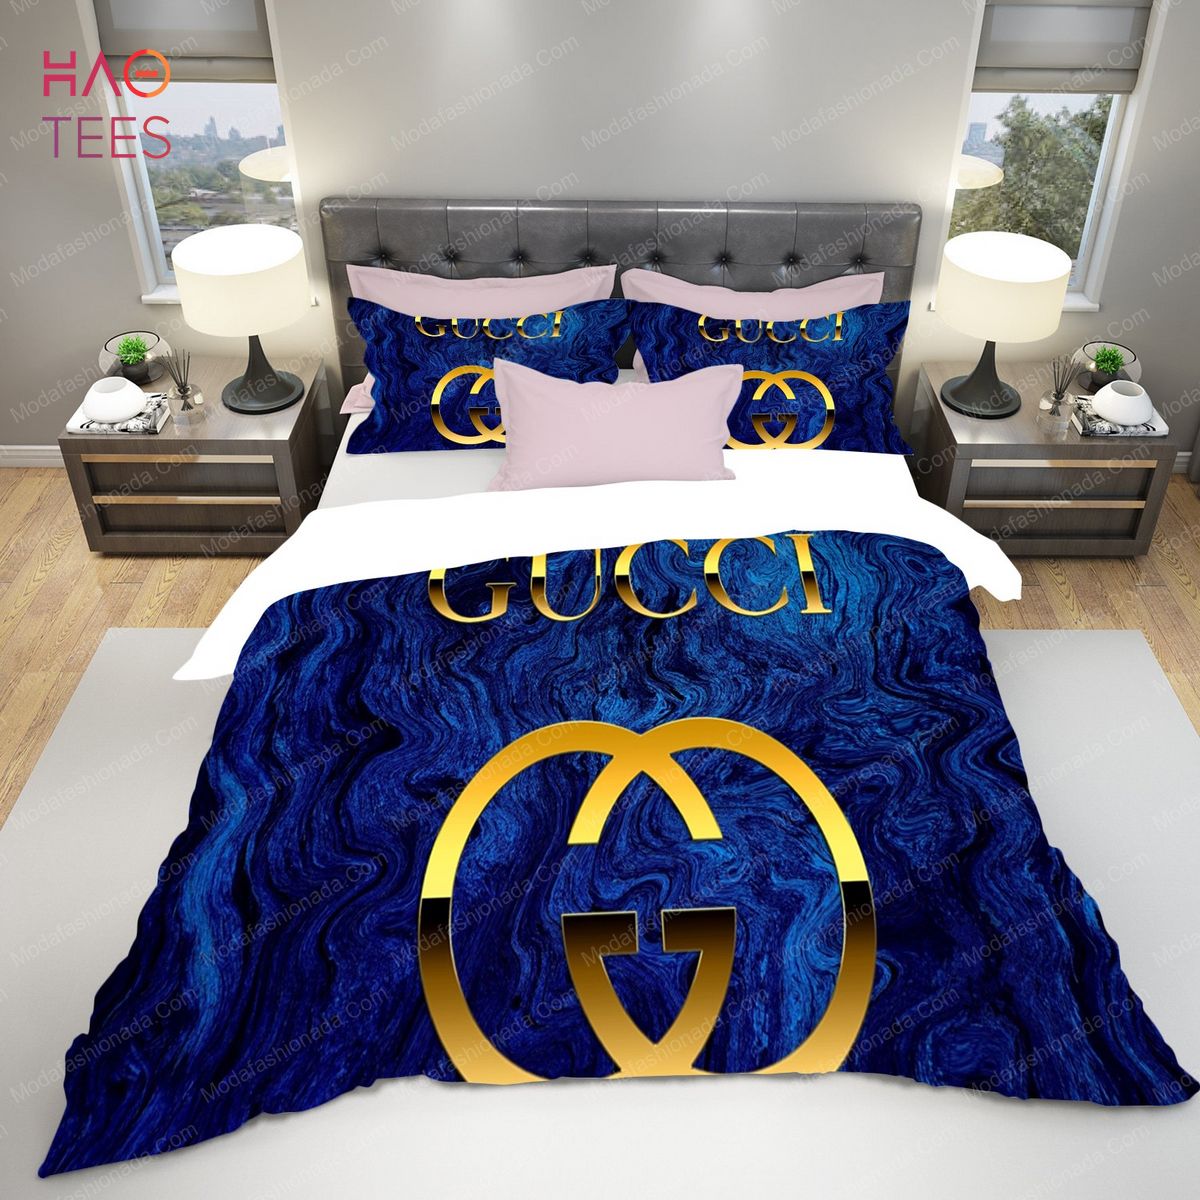 Gucci Word With Logo In Blue Background HD Brands Bedding Set